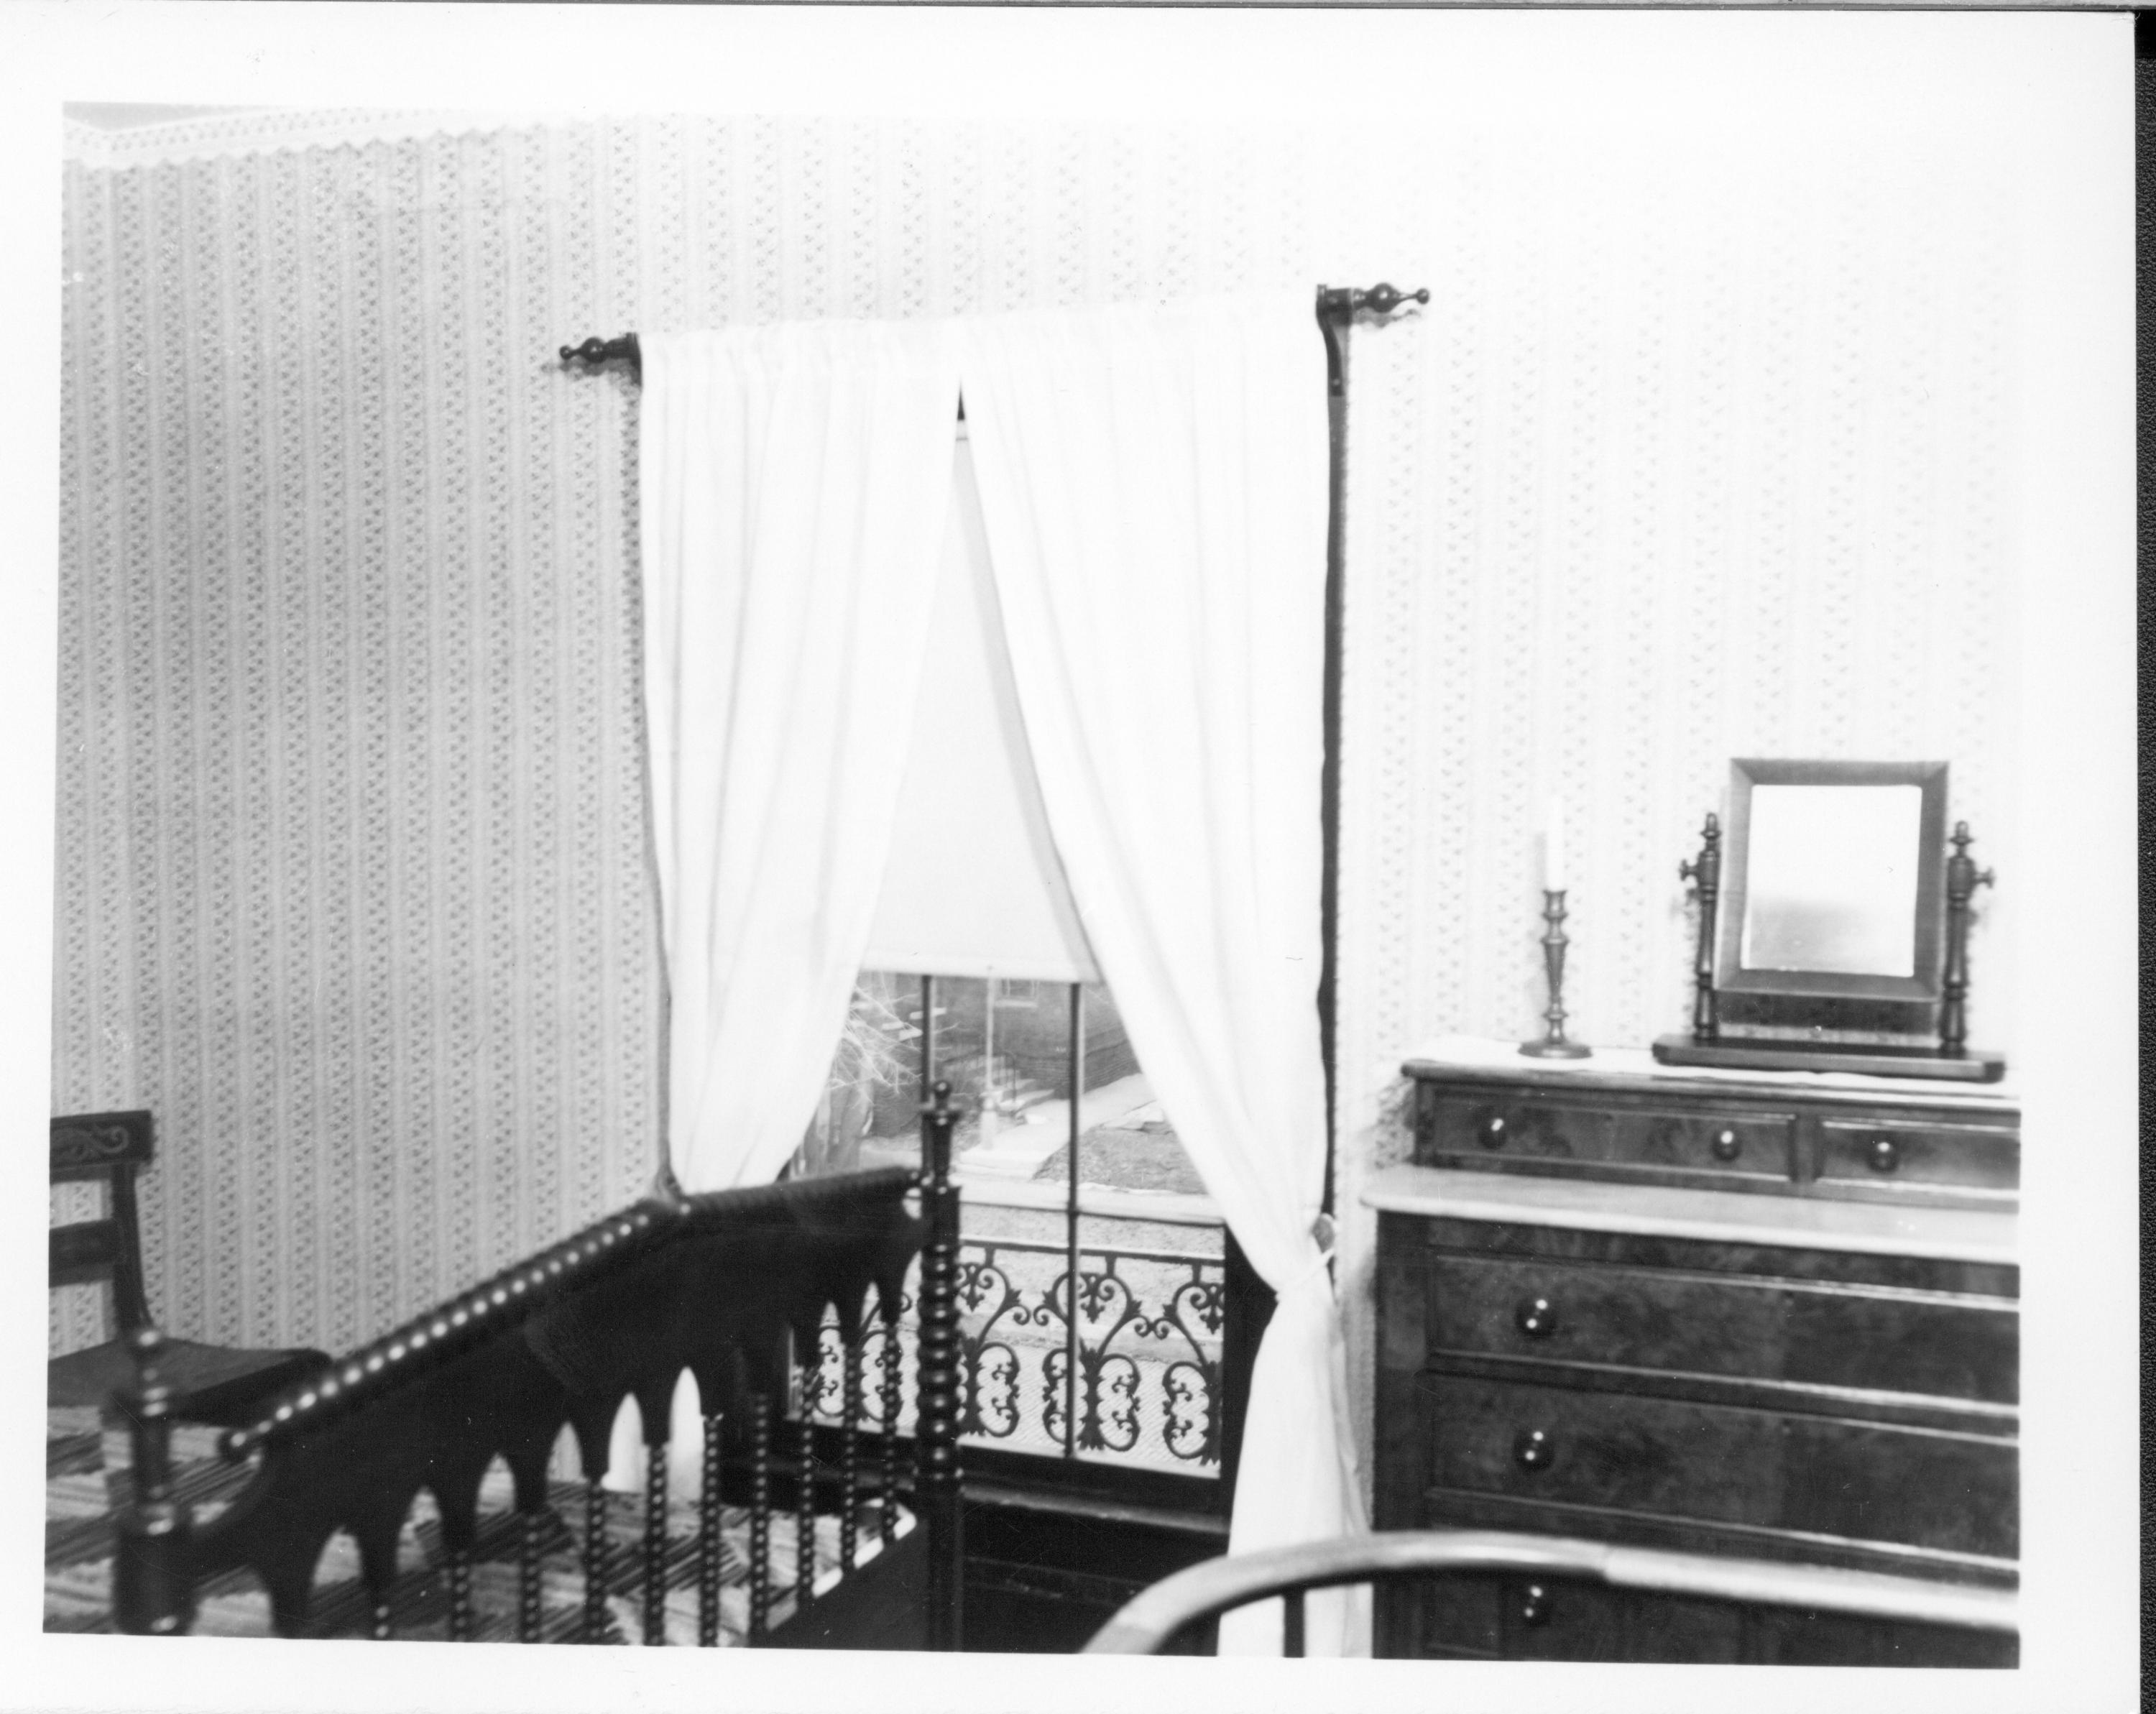 Boy's Bedroom - Lincoln's Home neg.#9, class.#310 Lincoln, Home, Guest Bedroom, Boy's Bedroom